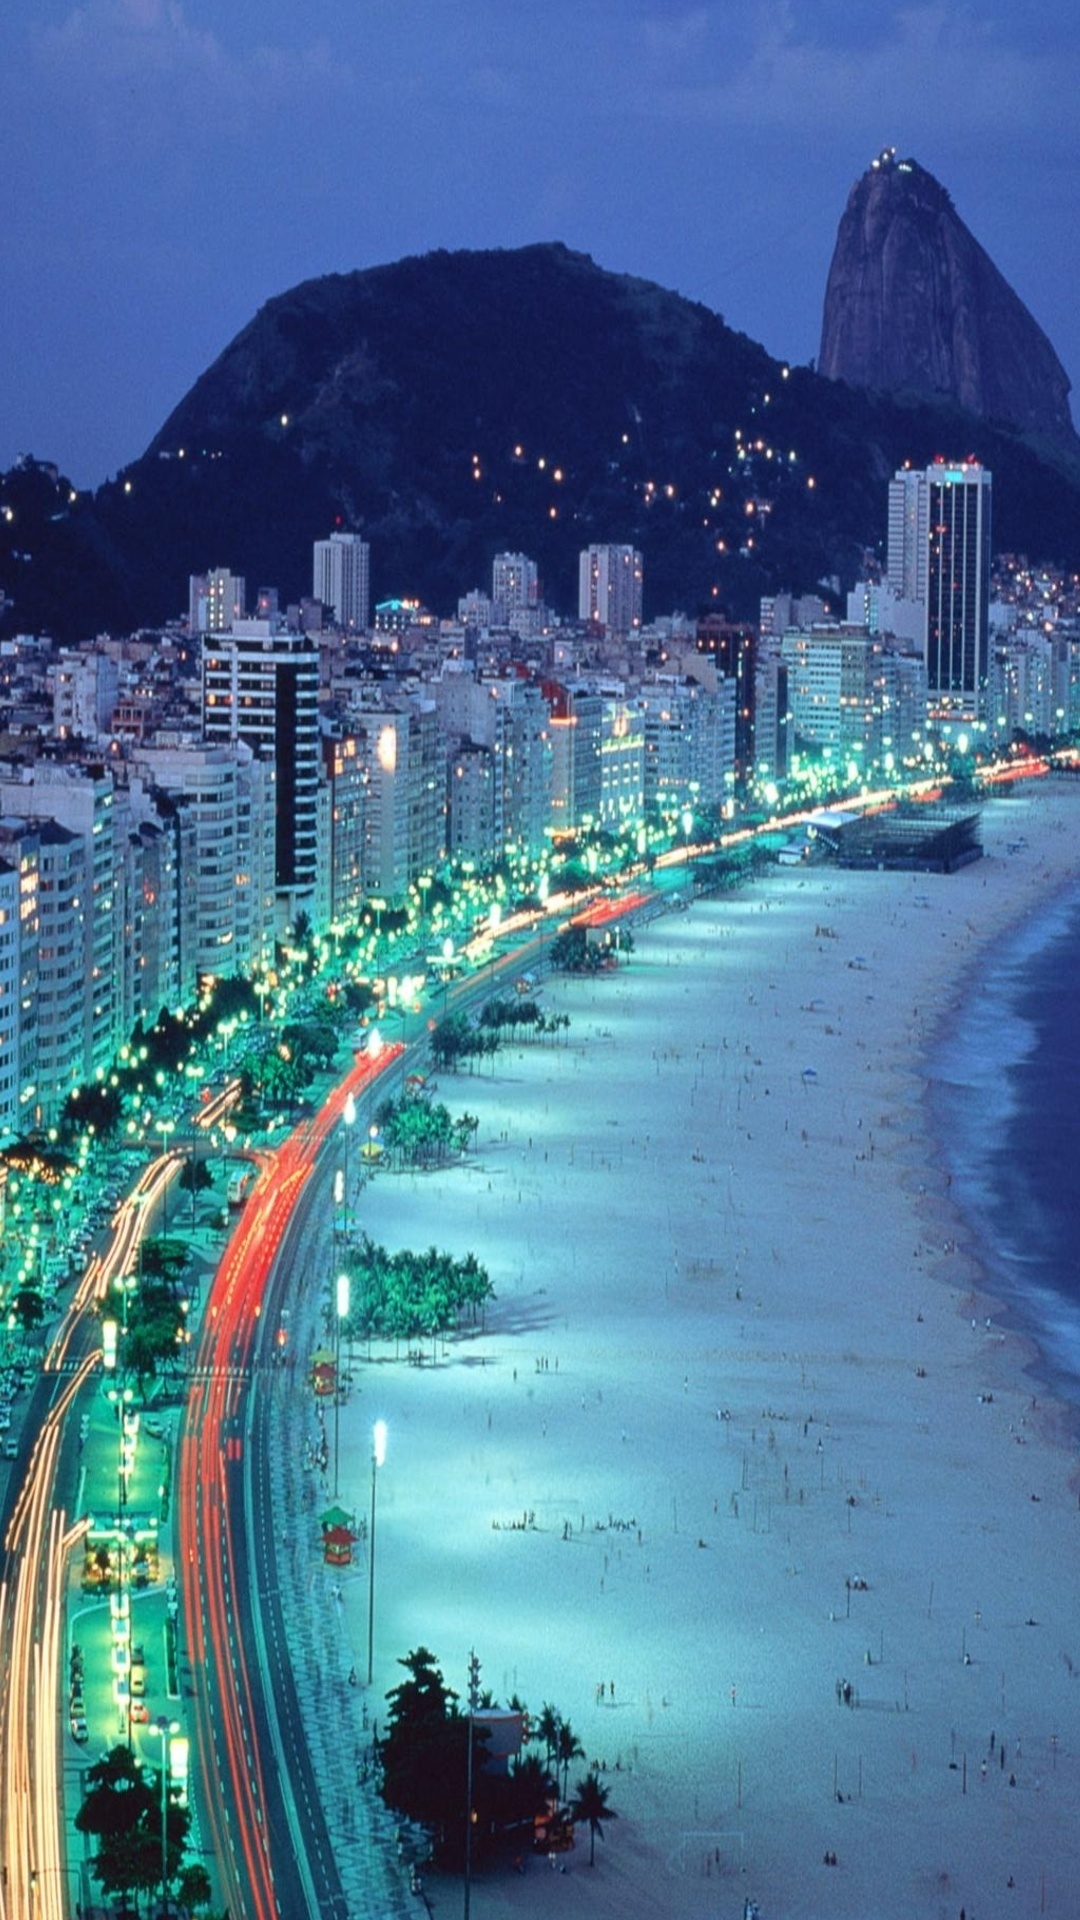 Rio de Janeiro iPhone wallpaper, Captivating images, Cultural richness, Beautiful scenery, 1080x1920 Full HD Phone